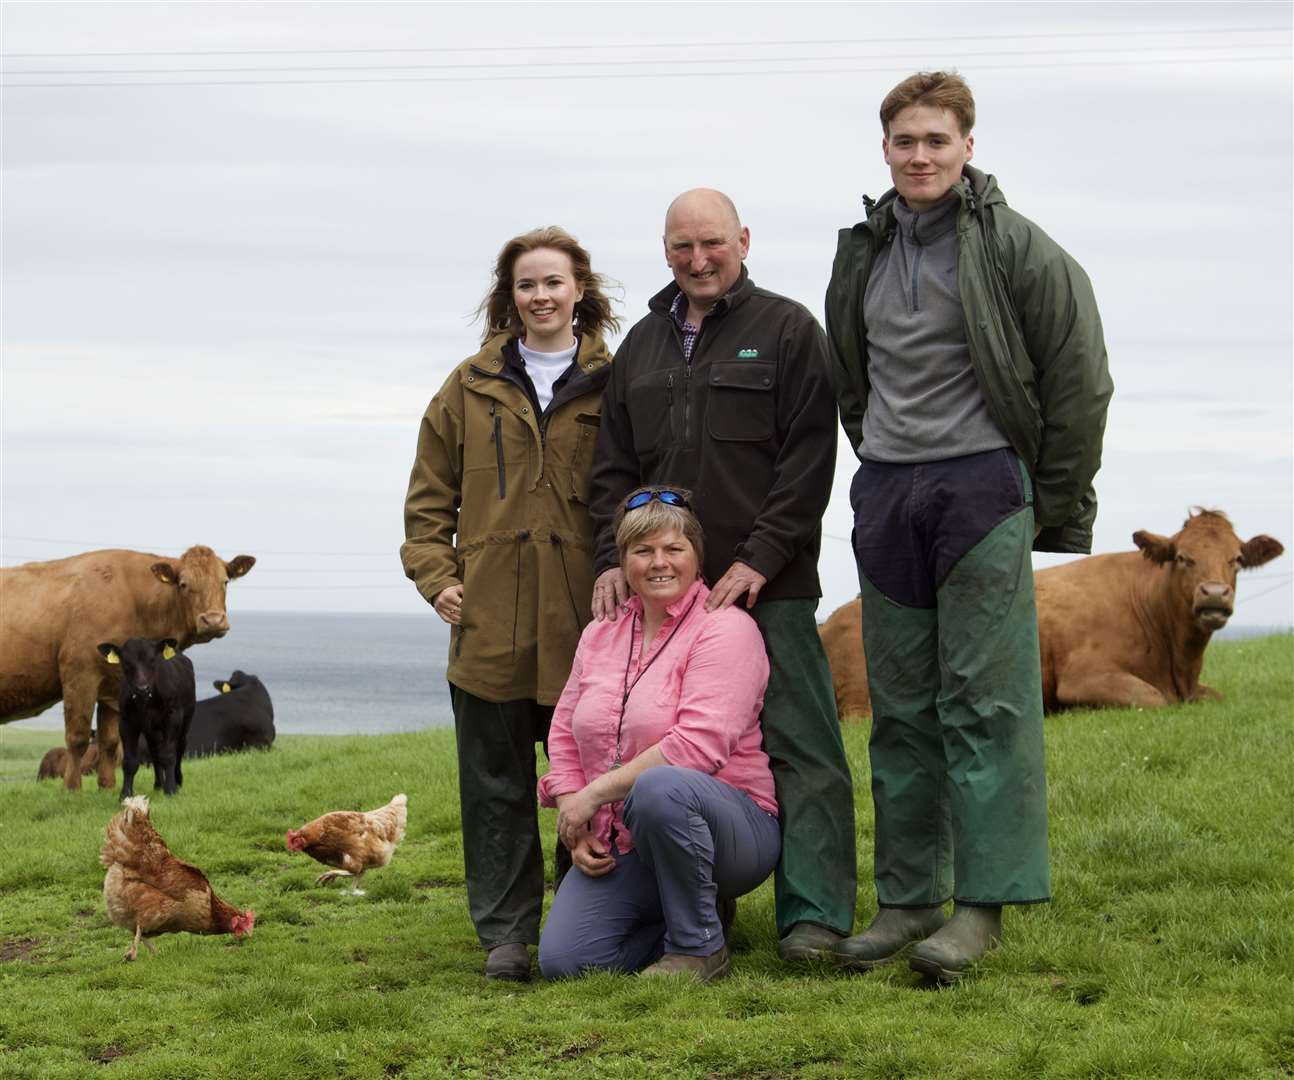 The Armadale Farm team with the cattle in the background, along with a couple of the free-range hens. Joyce can be seen kneeling in the front, with husband Ian behind, flanked by Frances and Mure. Picture: Caroline Jones